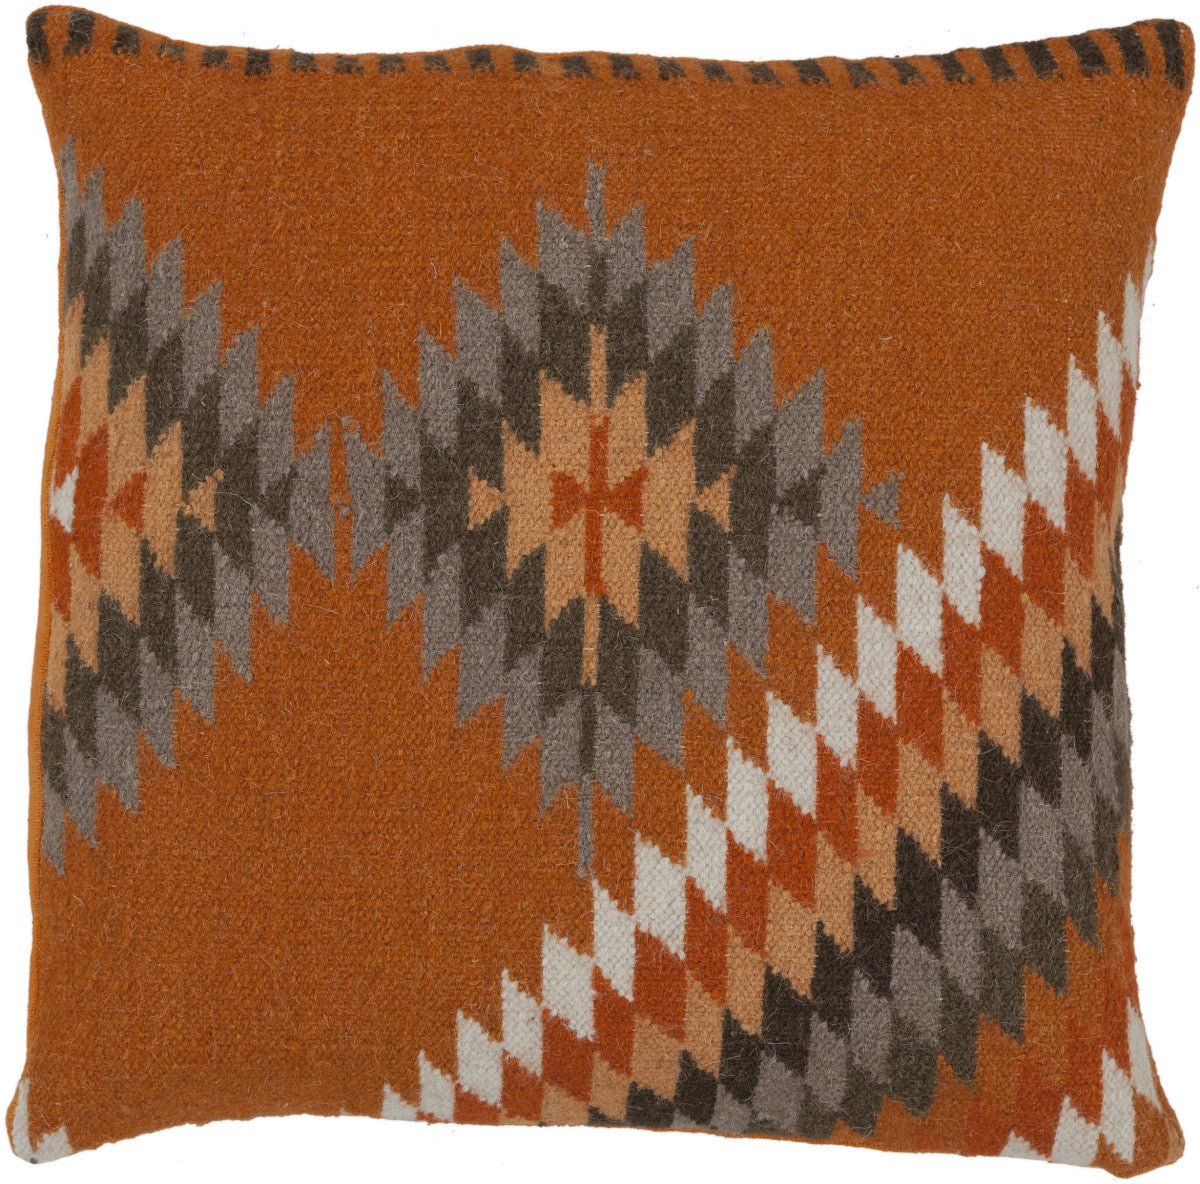 Surya Kilim Tranquil Tribal LD-037 Pillow by Beth Lacefield